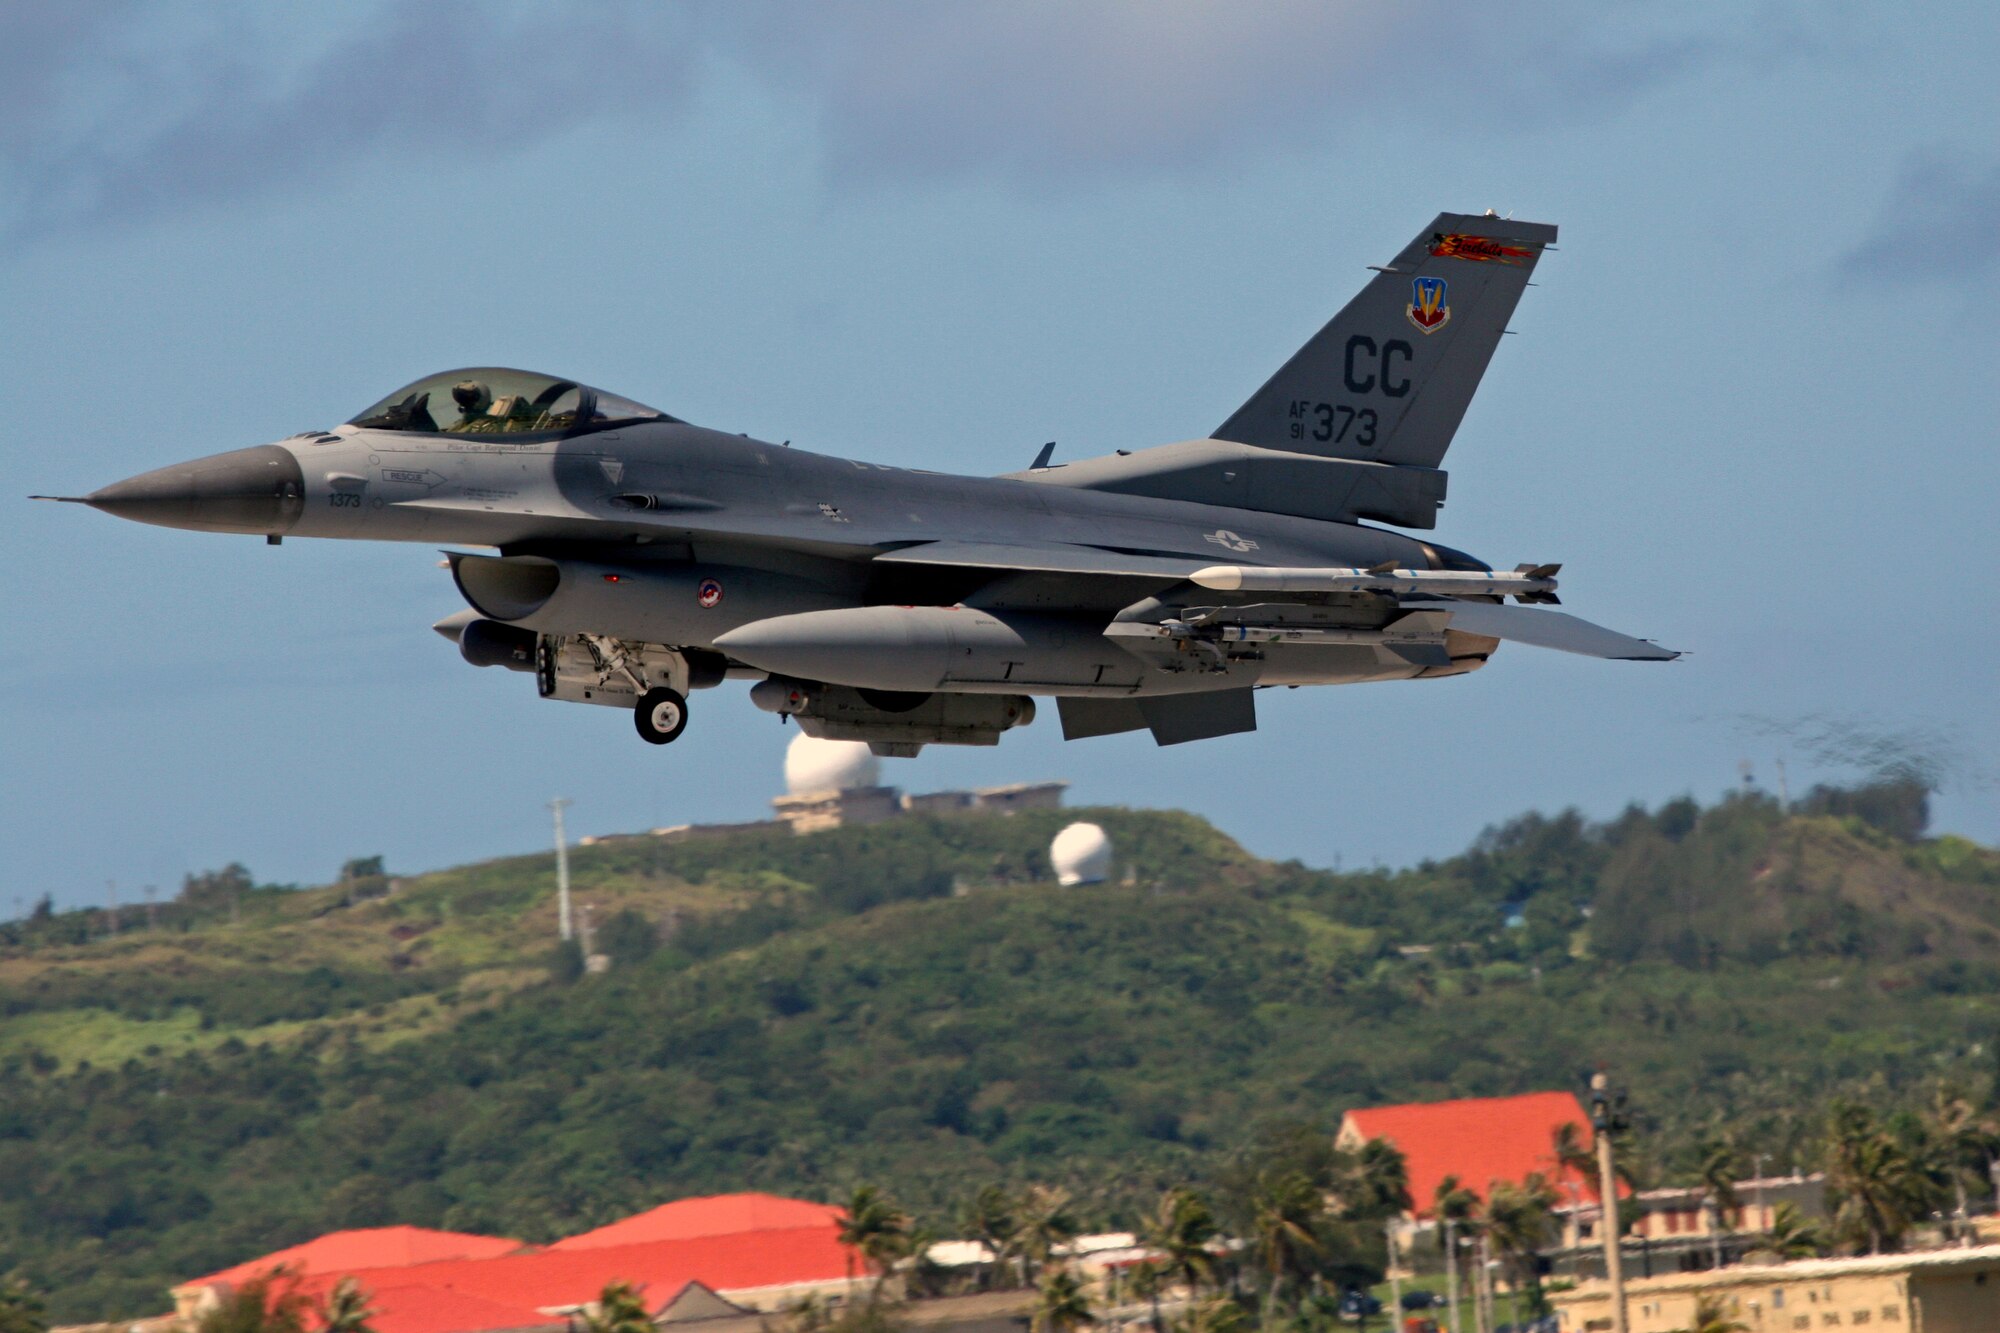 An F-16 Fighting Falcon from the 522 EFS, the Fireballs, takes off from Andersen Air Force Base, Guam. This is the last deployment for the Fireballs as well as their home station of the 27th Fighter Wing at Cannon Air Force Base. The Fireballs began their history in the skies over the Pacific Ocean during World War II and have come full circle by having their final deployment in the same area. The Fireballs will be inactivated after their return to home station. (Air Force photo/Senior Master Sgt. Mahmoud Rasouliyan)

